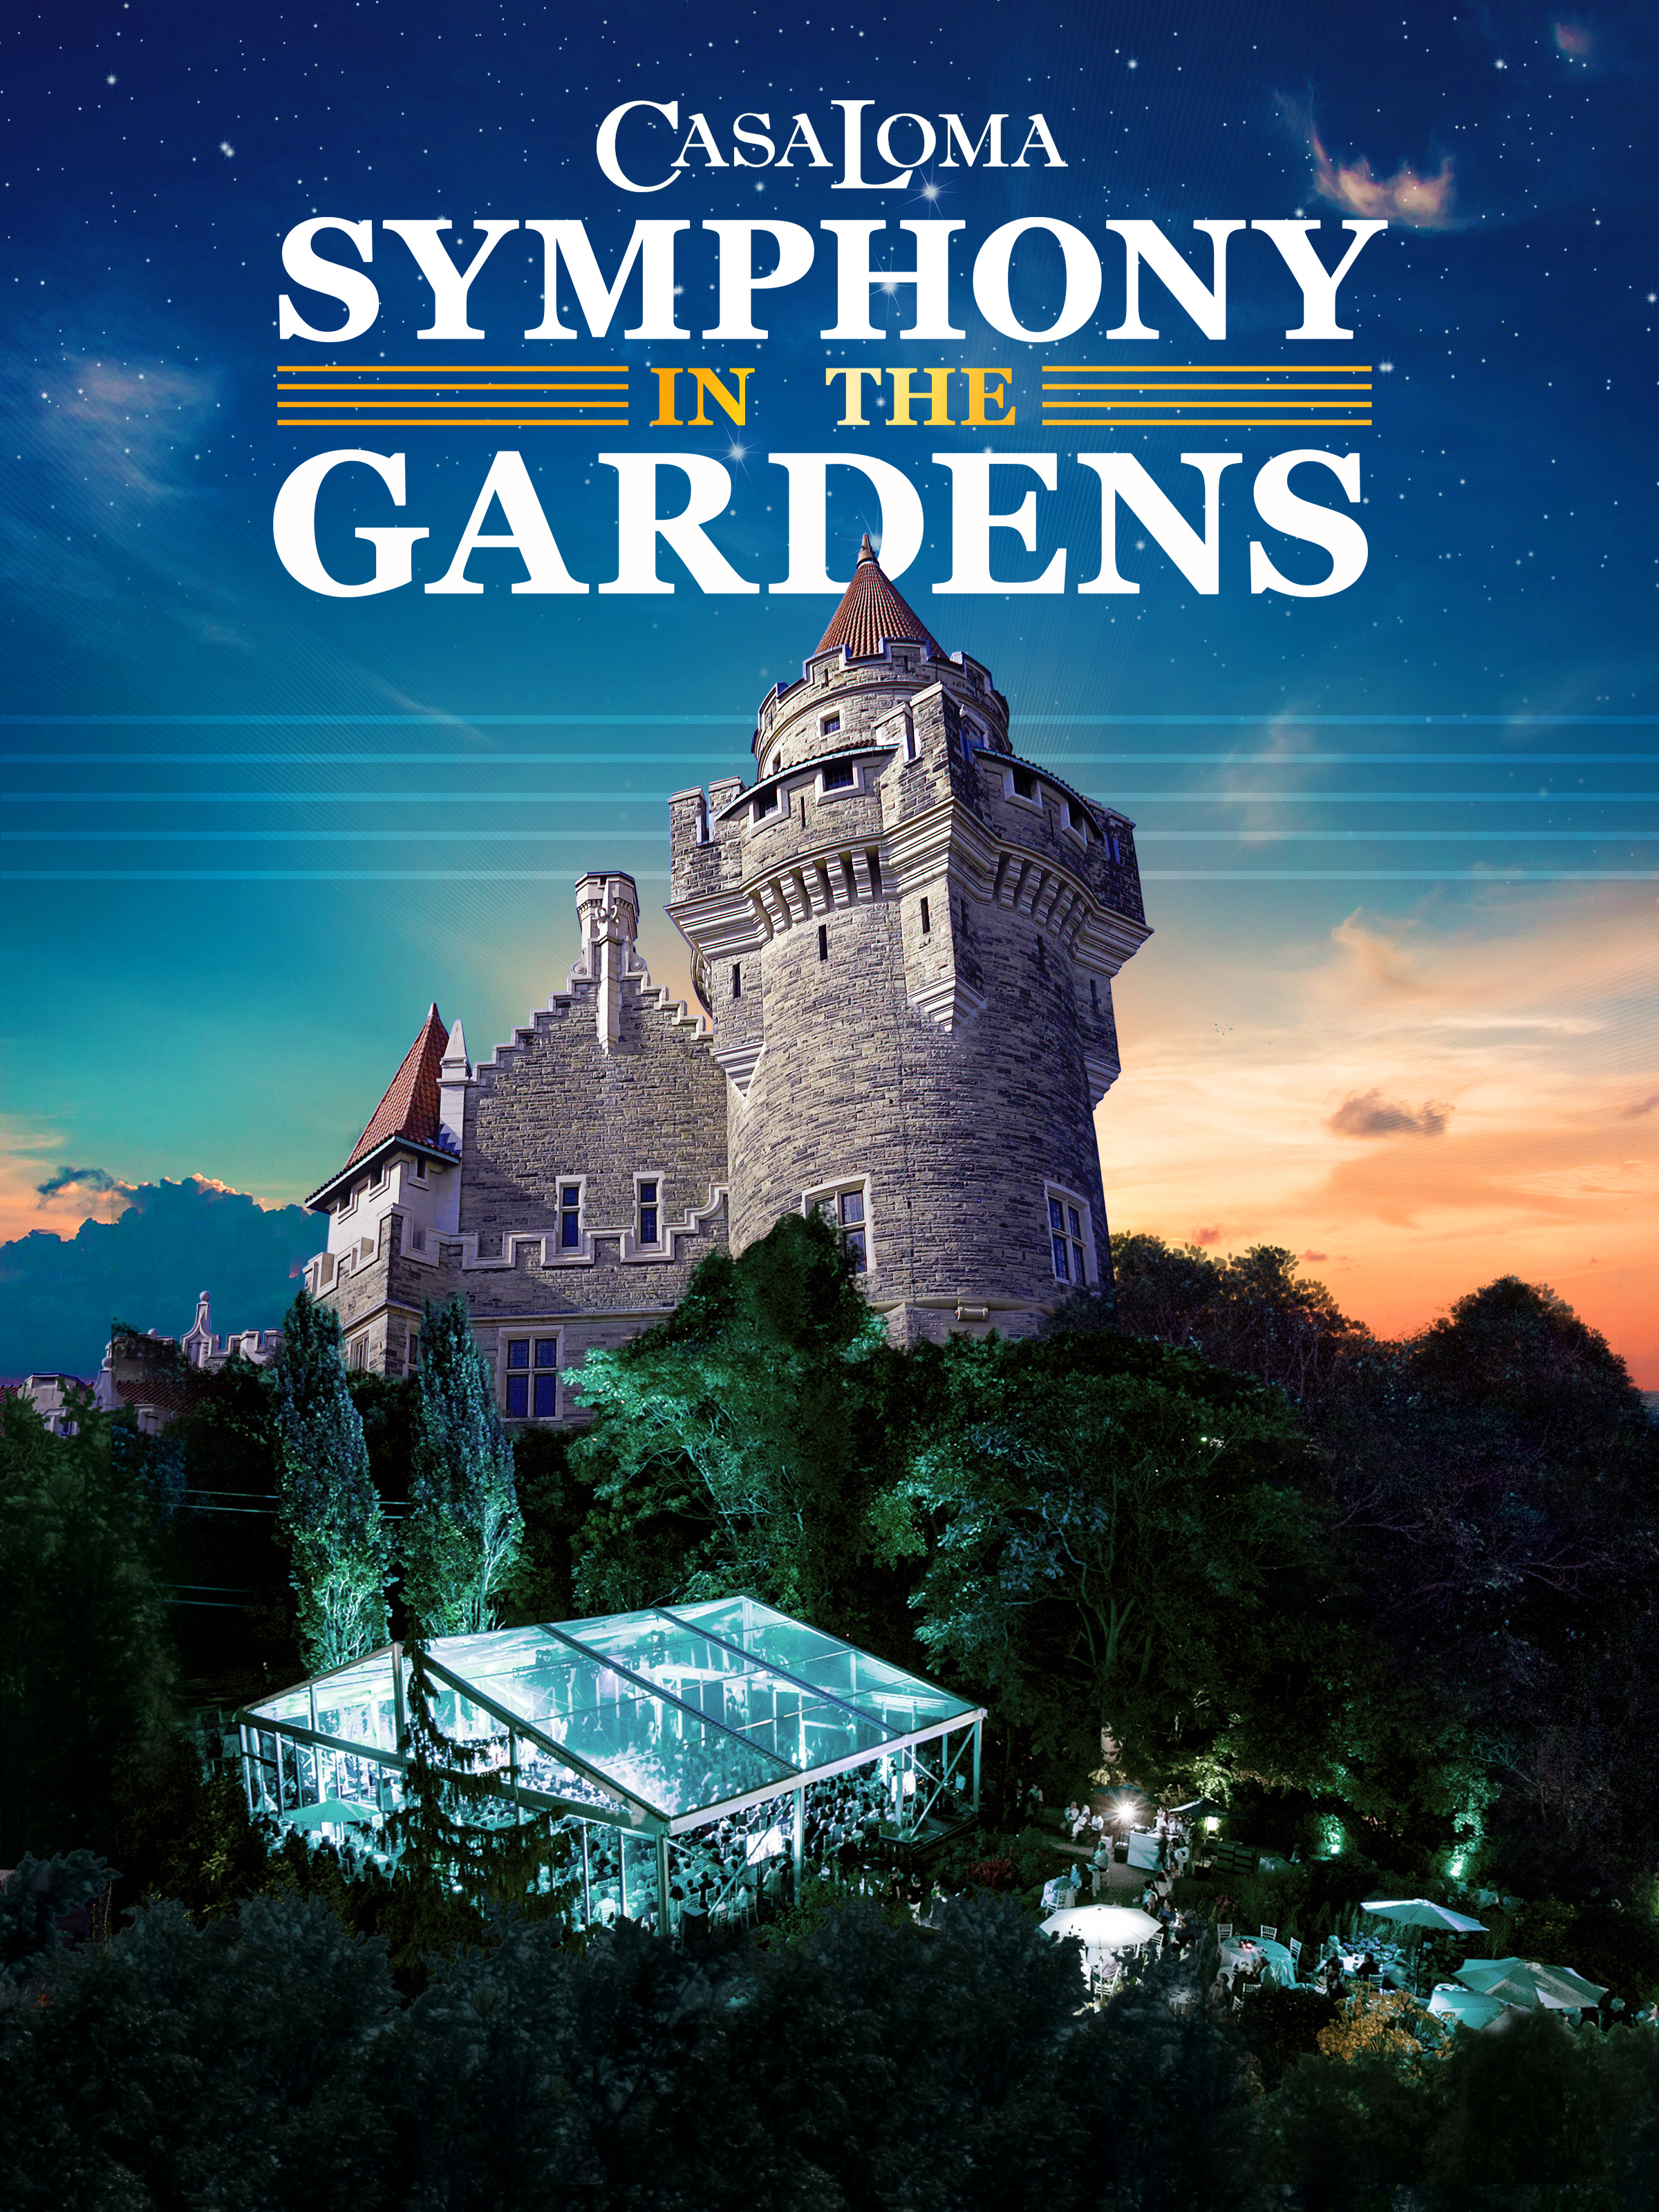 SYMPHONY IN THE GARDENS